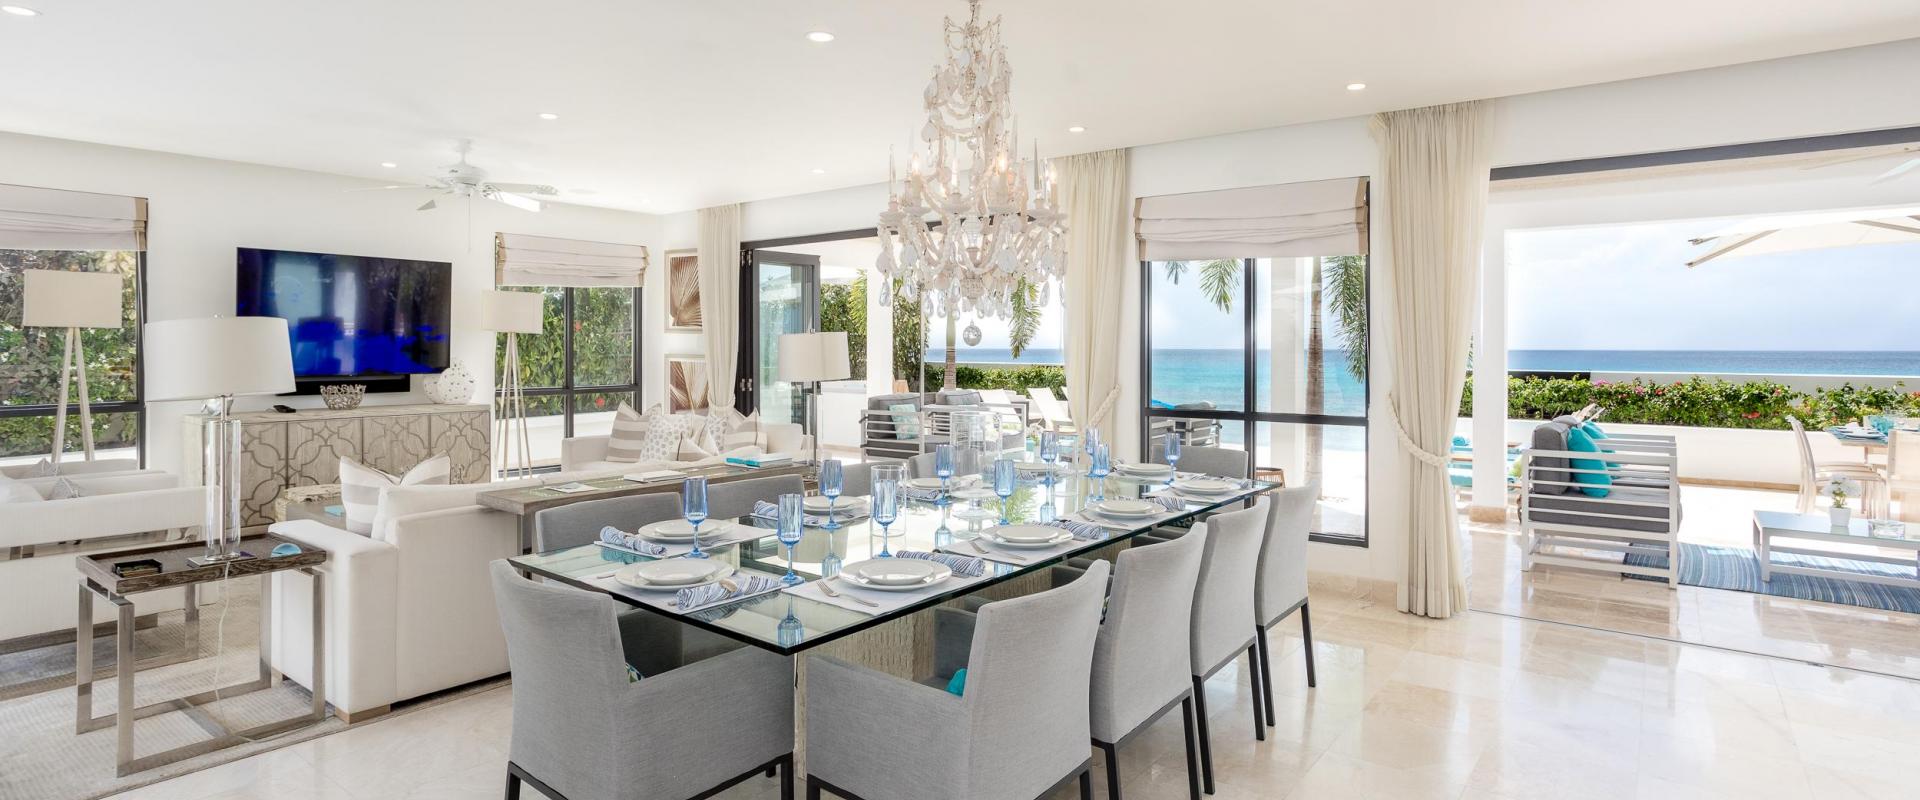 Barbados Vacation Villa Dolphin Beach House Living and Dining Room